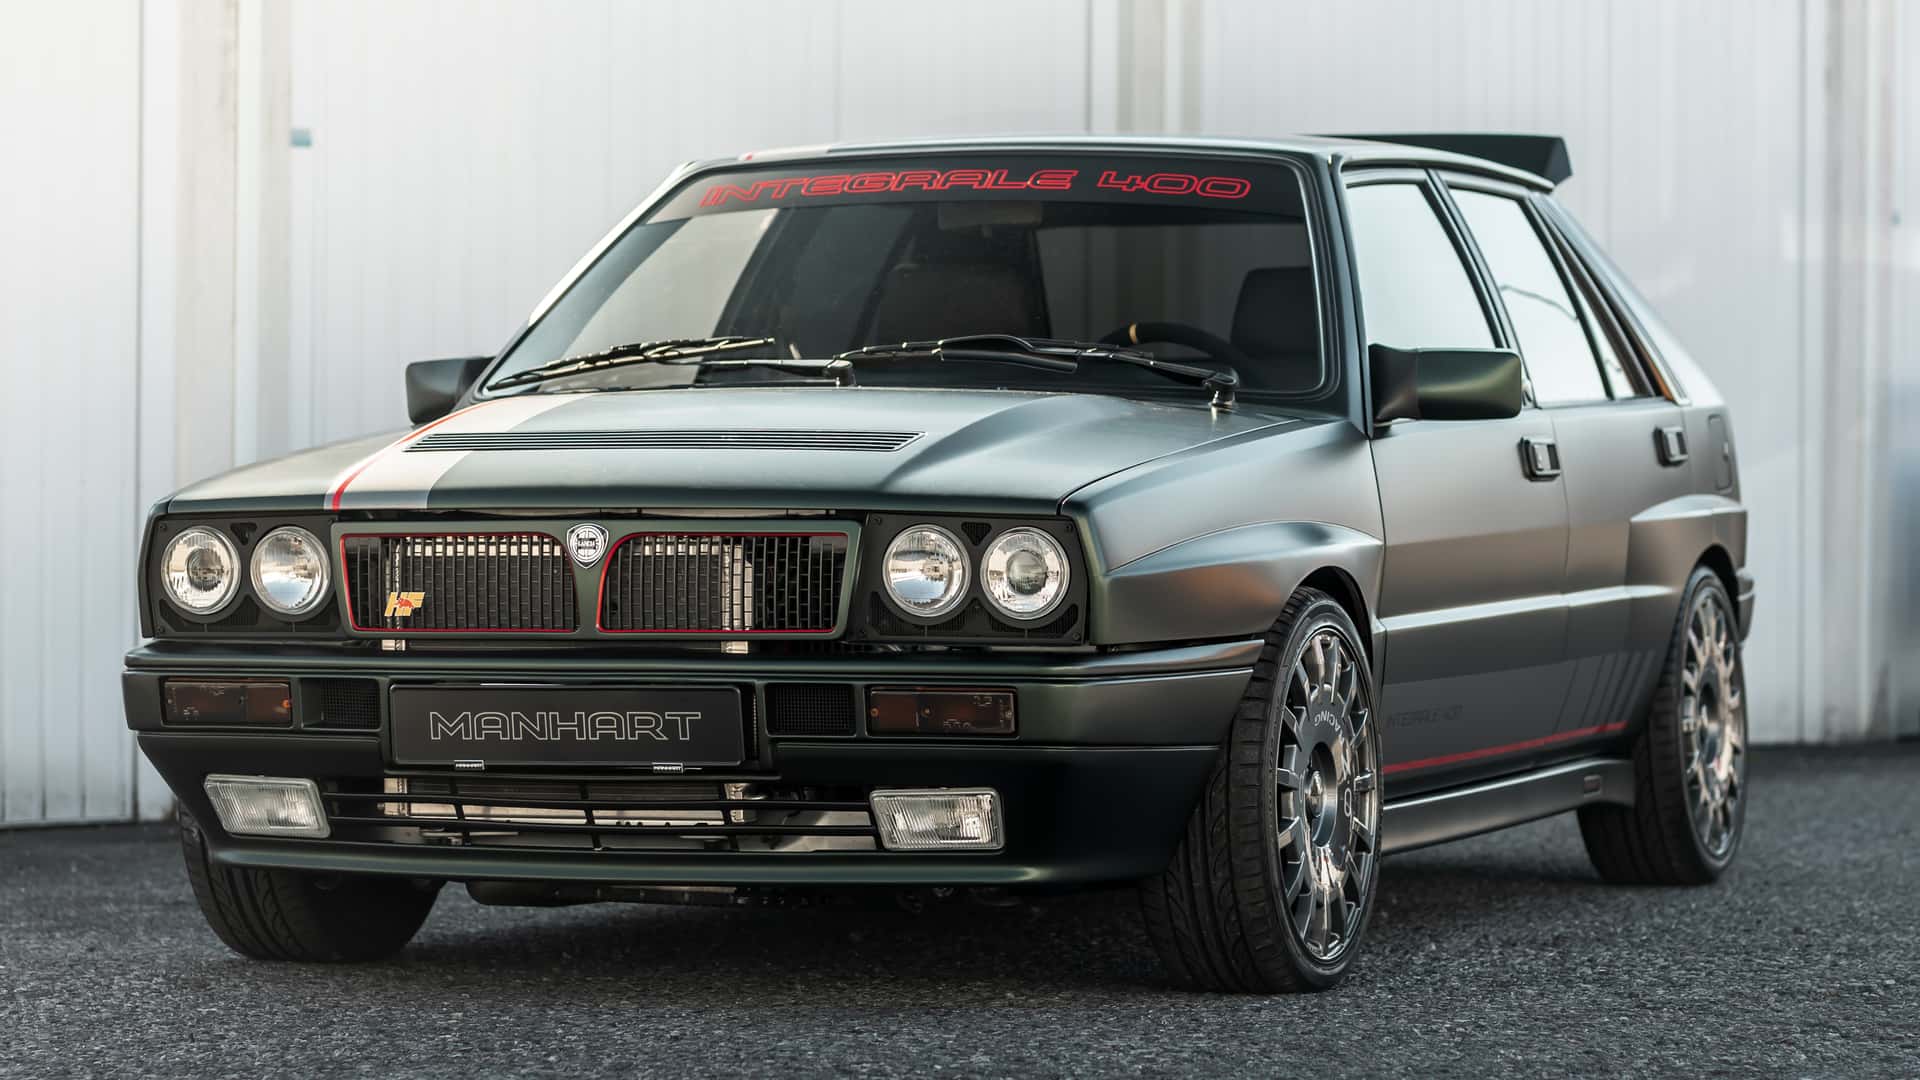 manhart tuned the hell out of the lancia delta integrale 218011 1